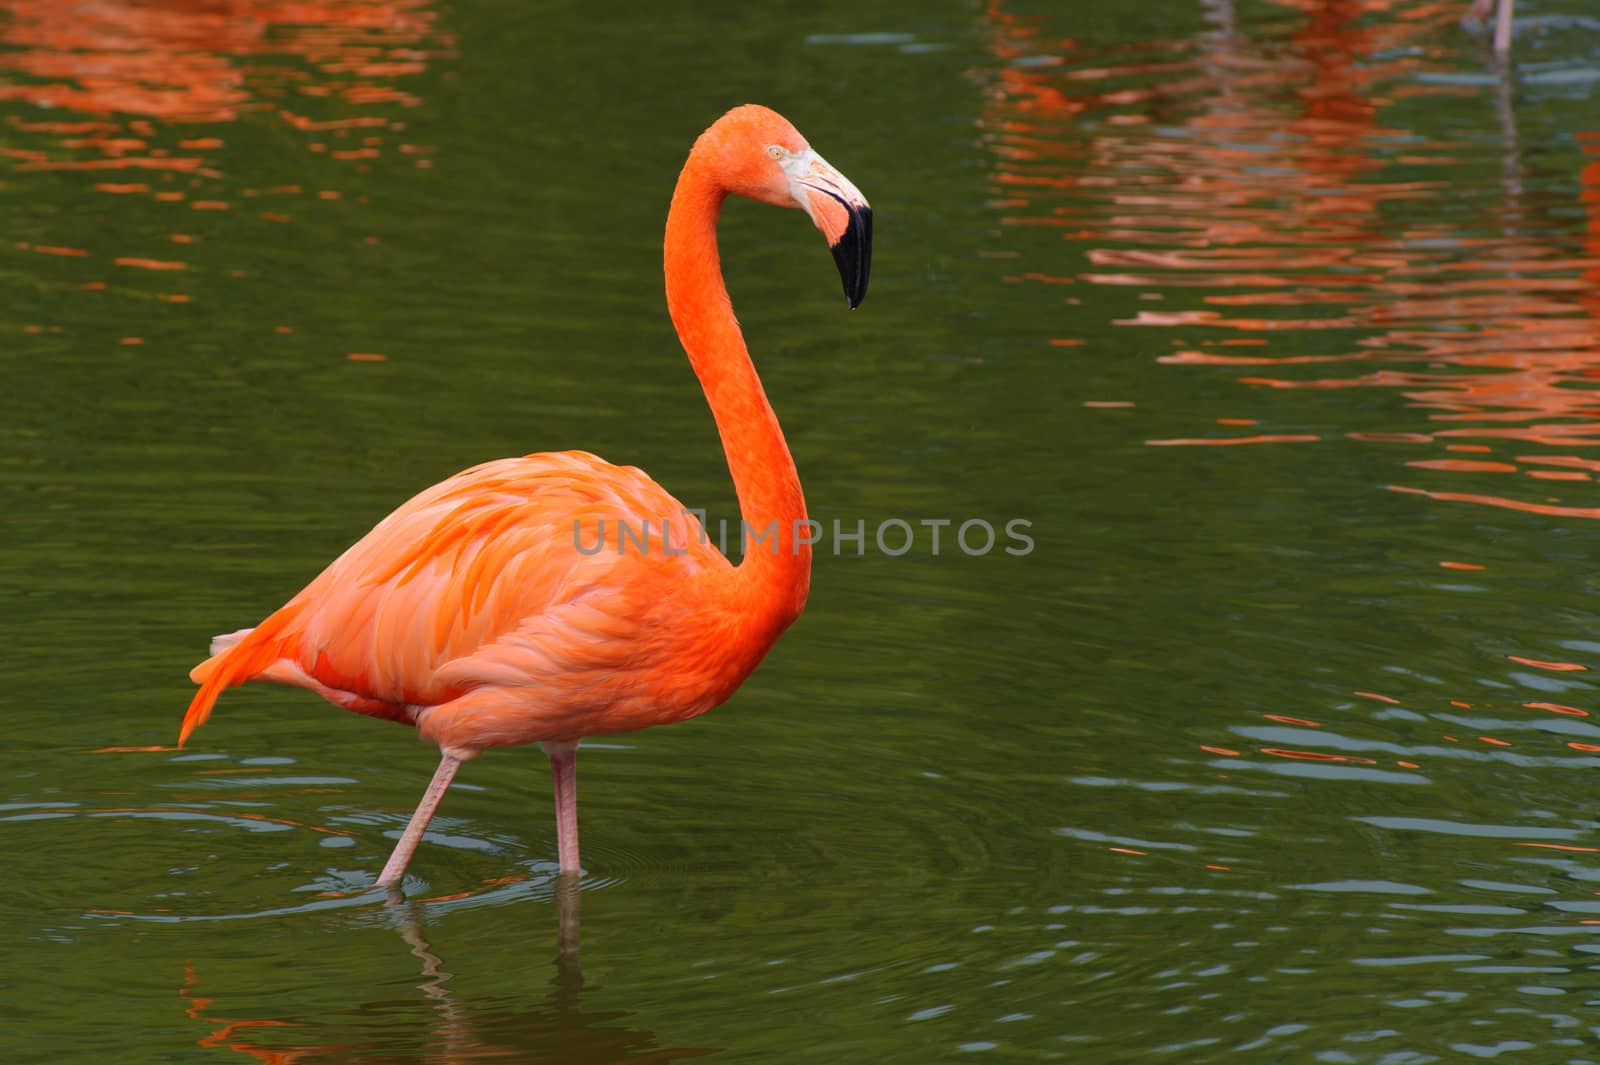 Flamingo walking in water at Whipsnade zoo